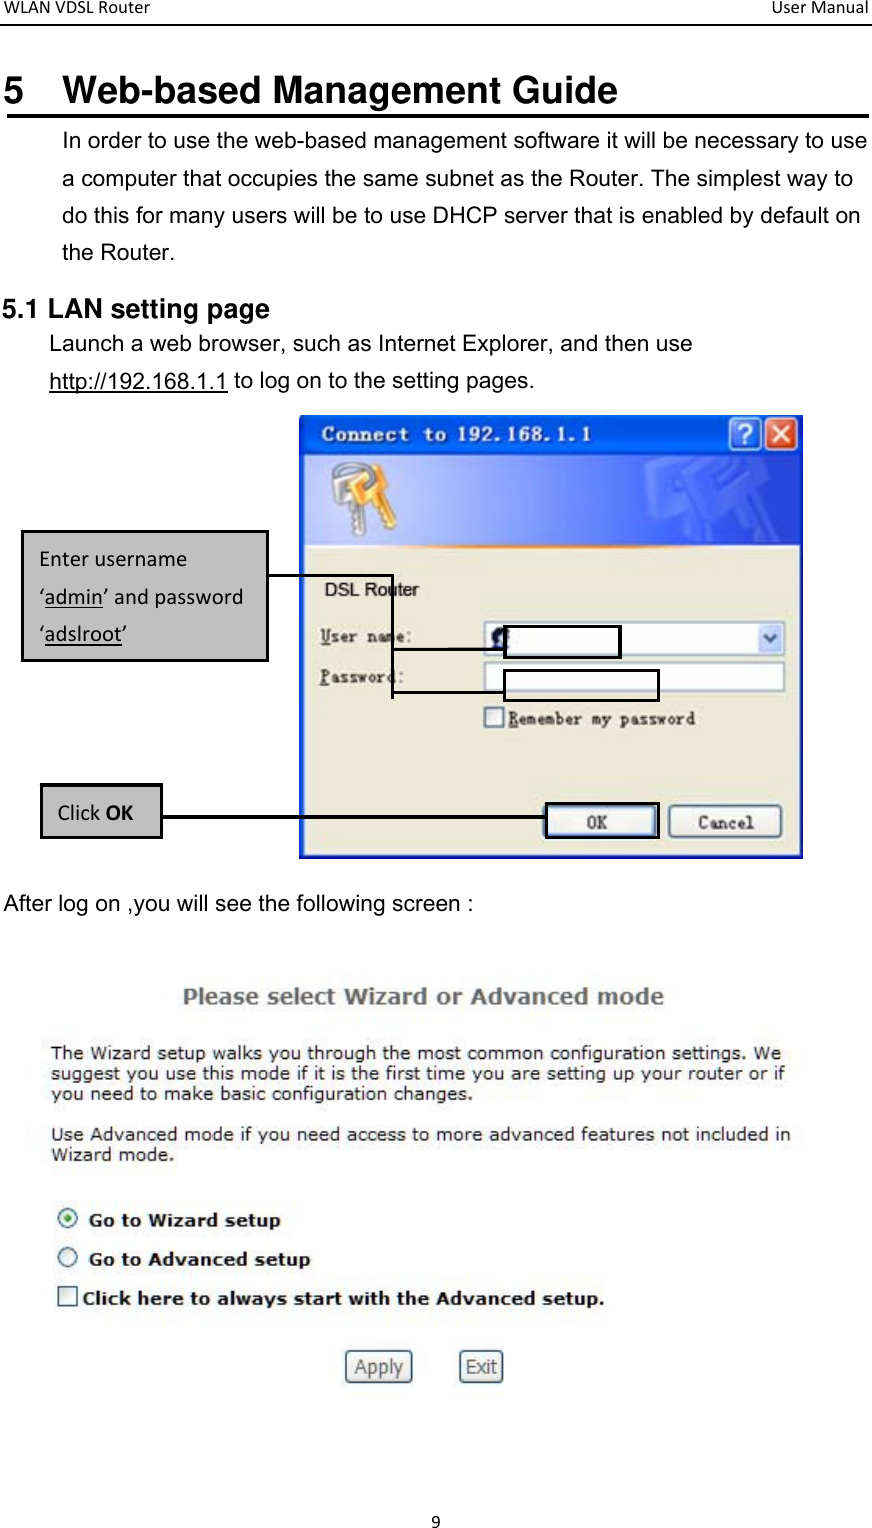 WLANVDSLRouter  UserManual95  Web-based Management Guide In order to use the web-based management software it will be necessary to use a computer that occupies the same subnet as the Router. The simplest way to do this for many users will be to use DHCP server that is enabled by default on the Router. 5.1 LAN setting page Launch a web browser, such as Internet Explorer, and then use http://192.168.1.1 to log on to the setting pages.     After log on ,you will see the following screen :  ClickOKEnterusername‘admin’andpassword‘adslroot’